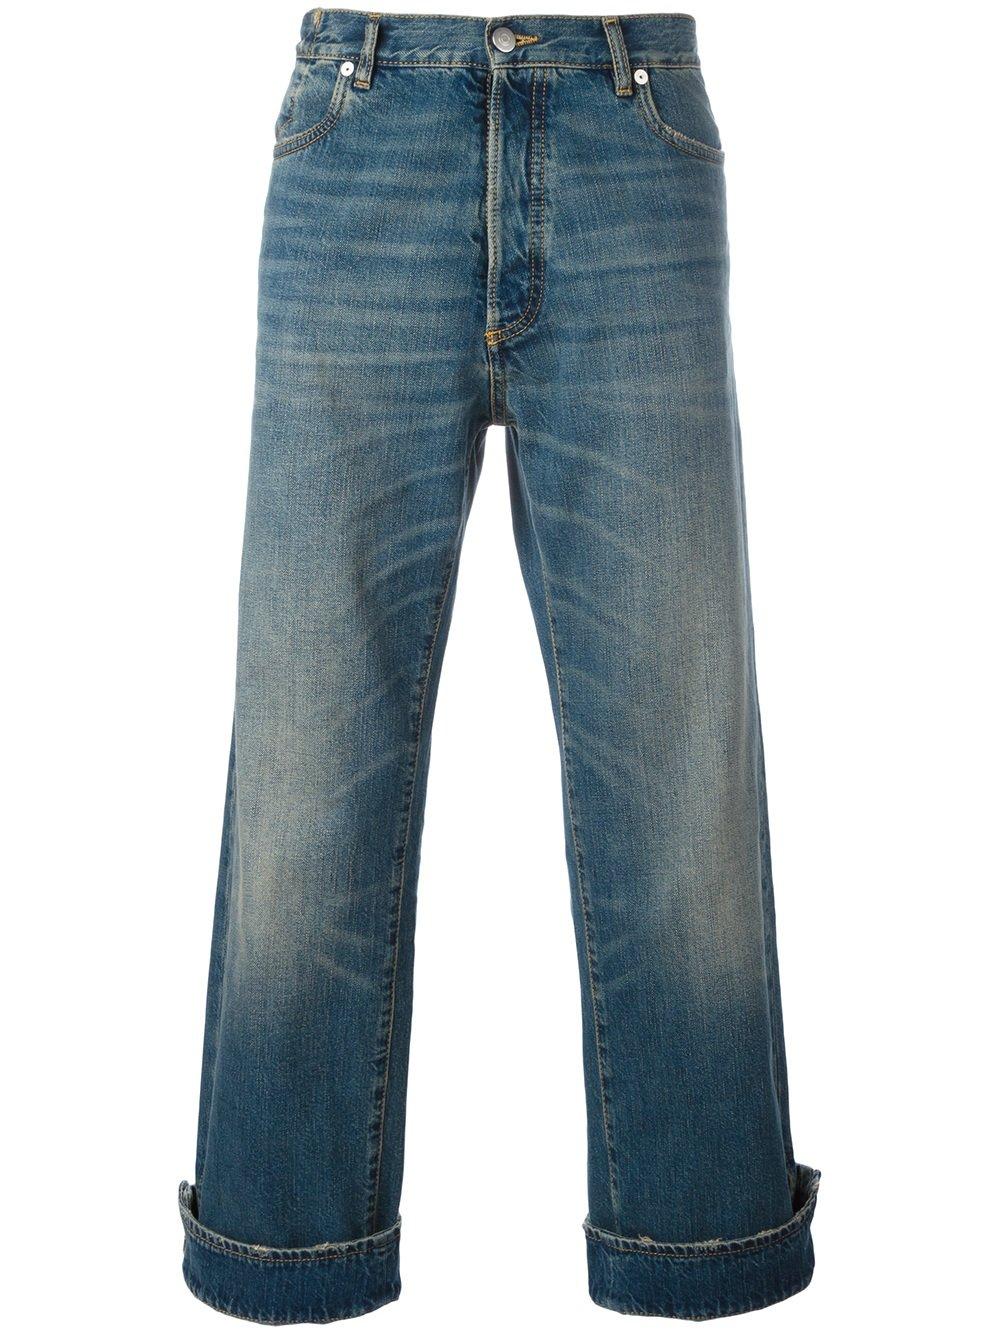 Maison margiela Turn-up Cuffs Cropped Jeans in Blue for Men | Lyst